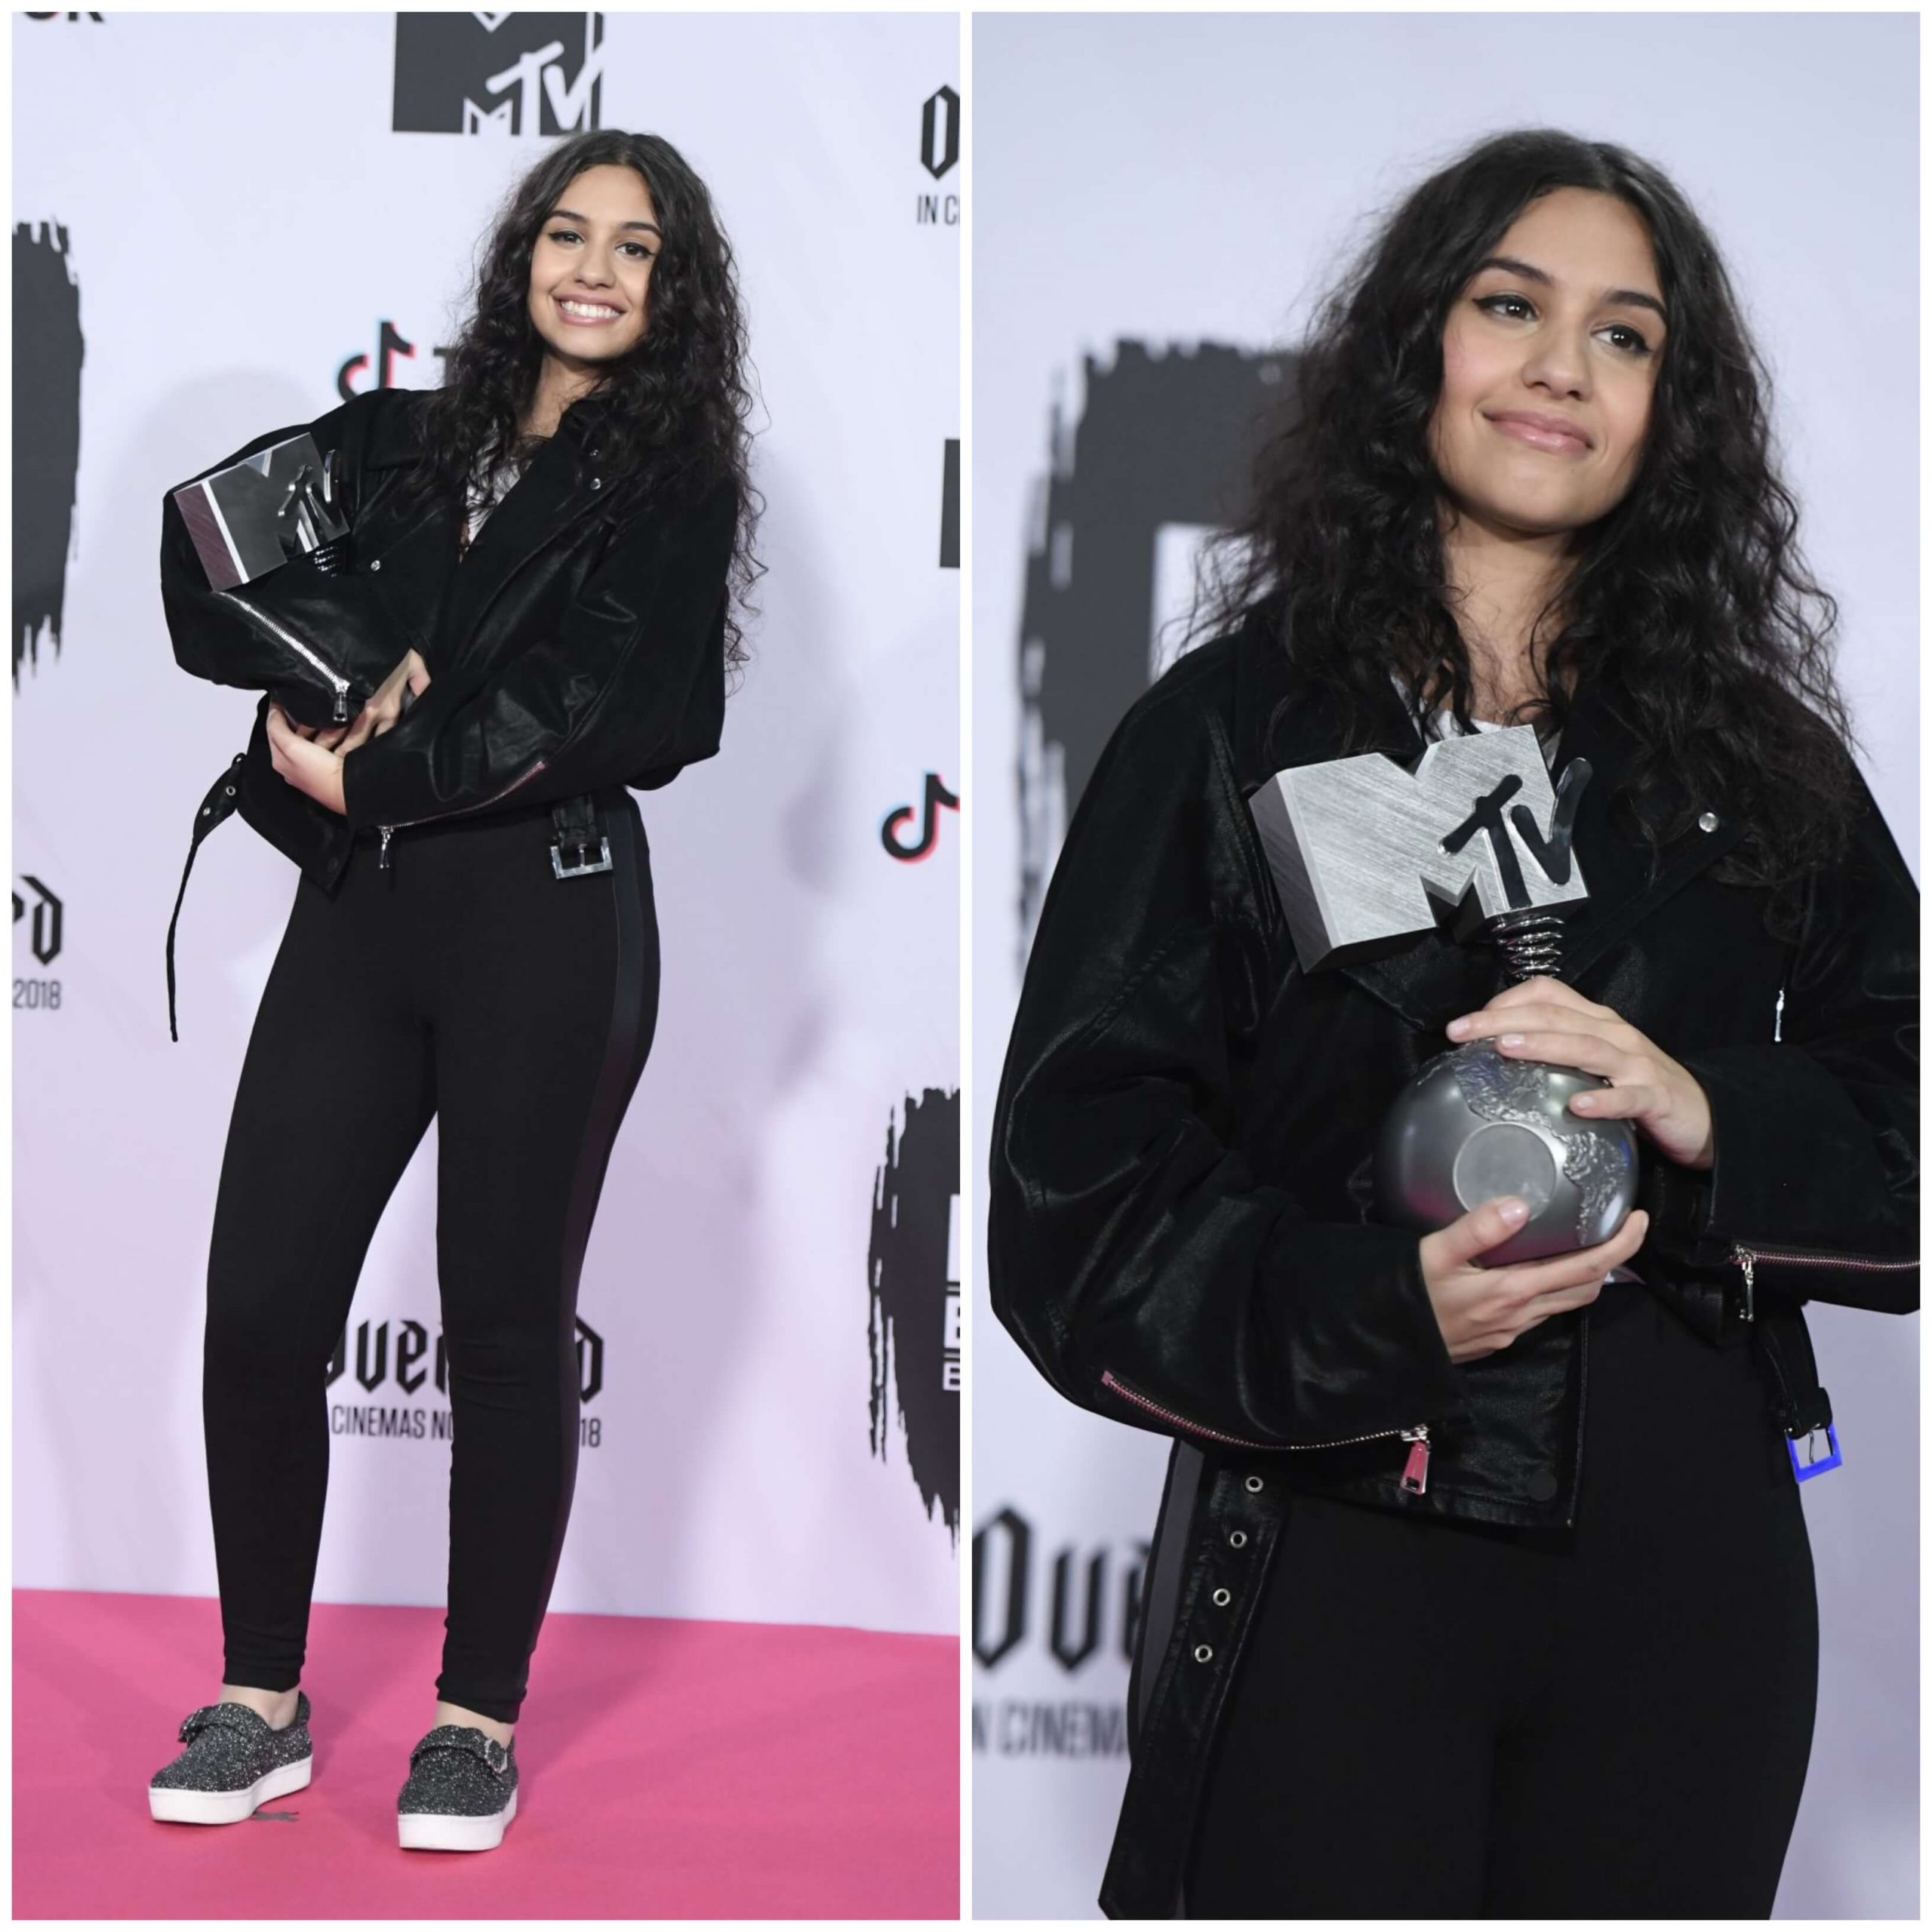 Alessia Cara – in Black Jacket With Black Jeans -  MTV EMA’s 2018 in Bilbao